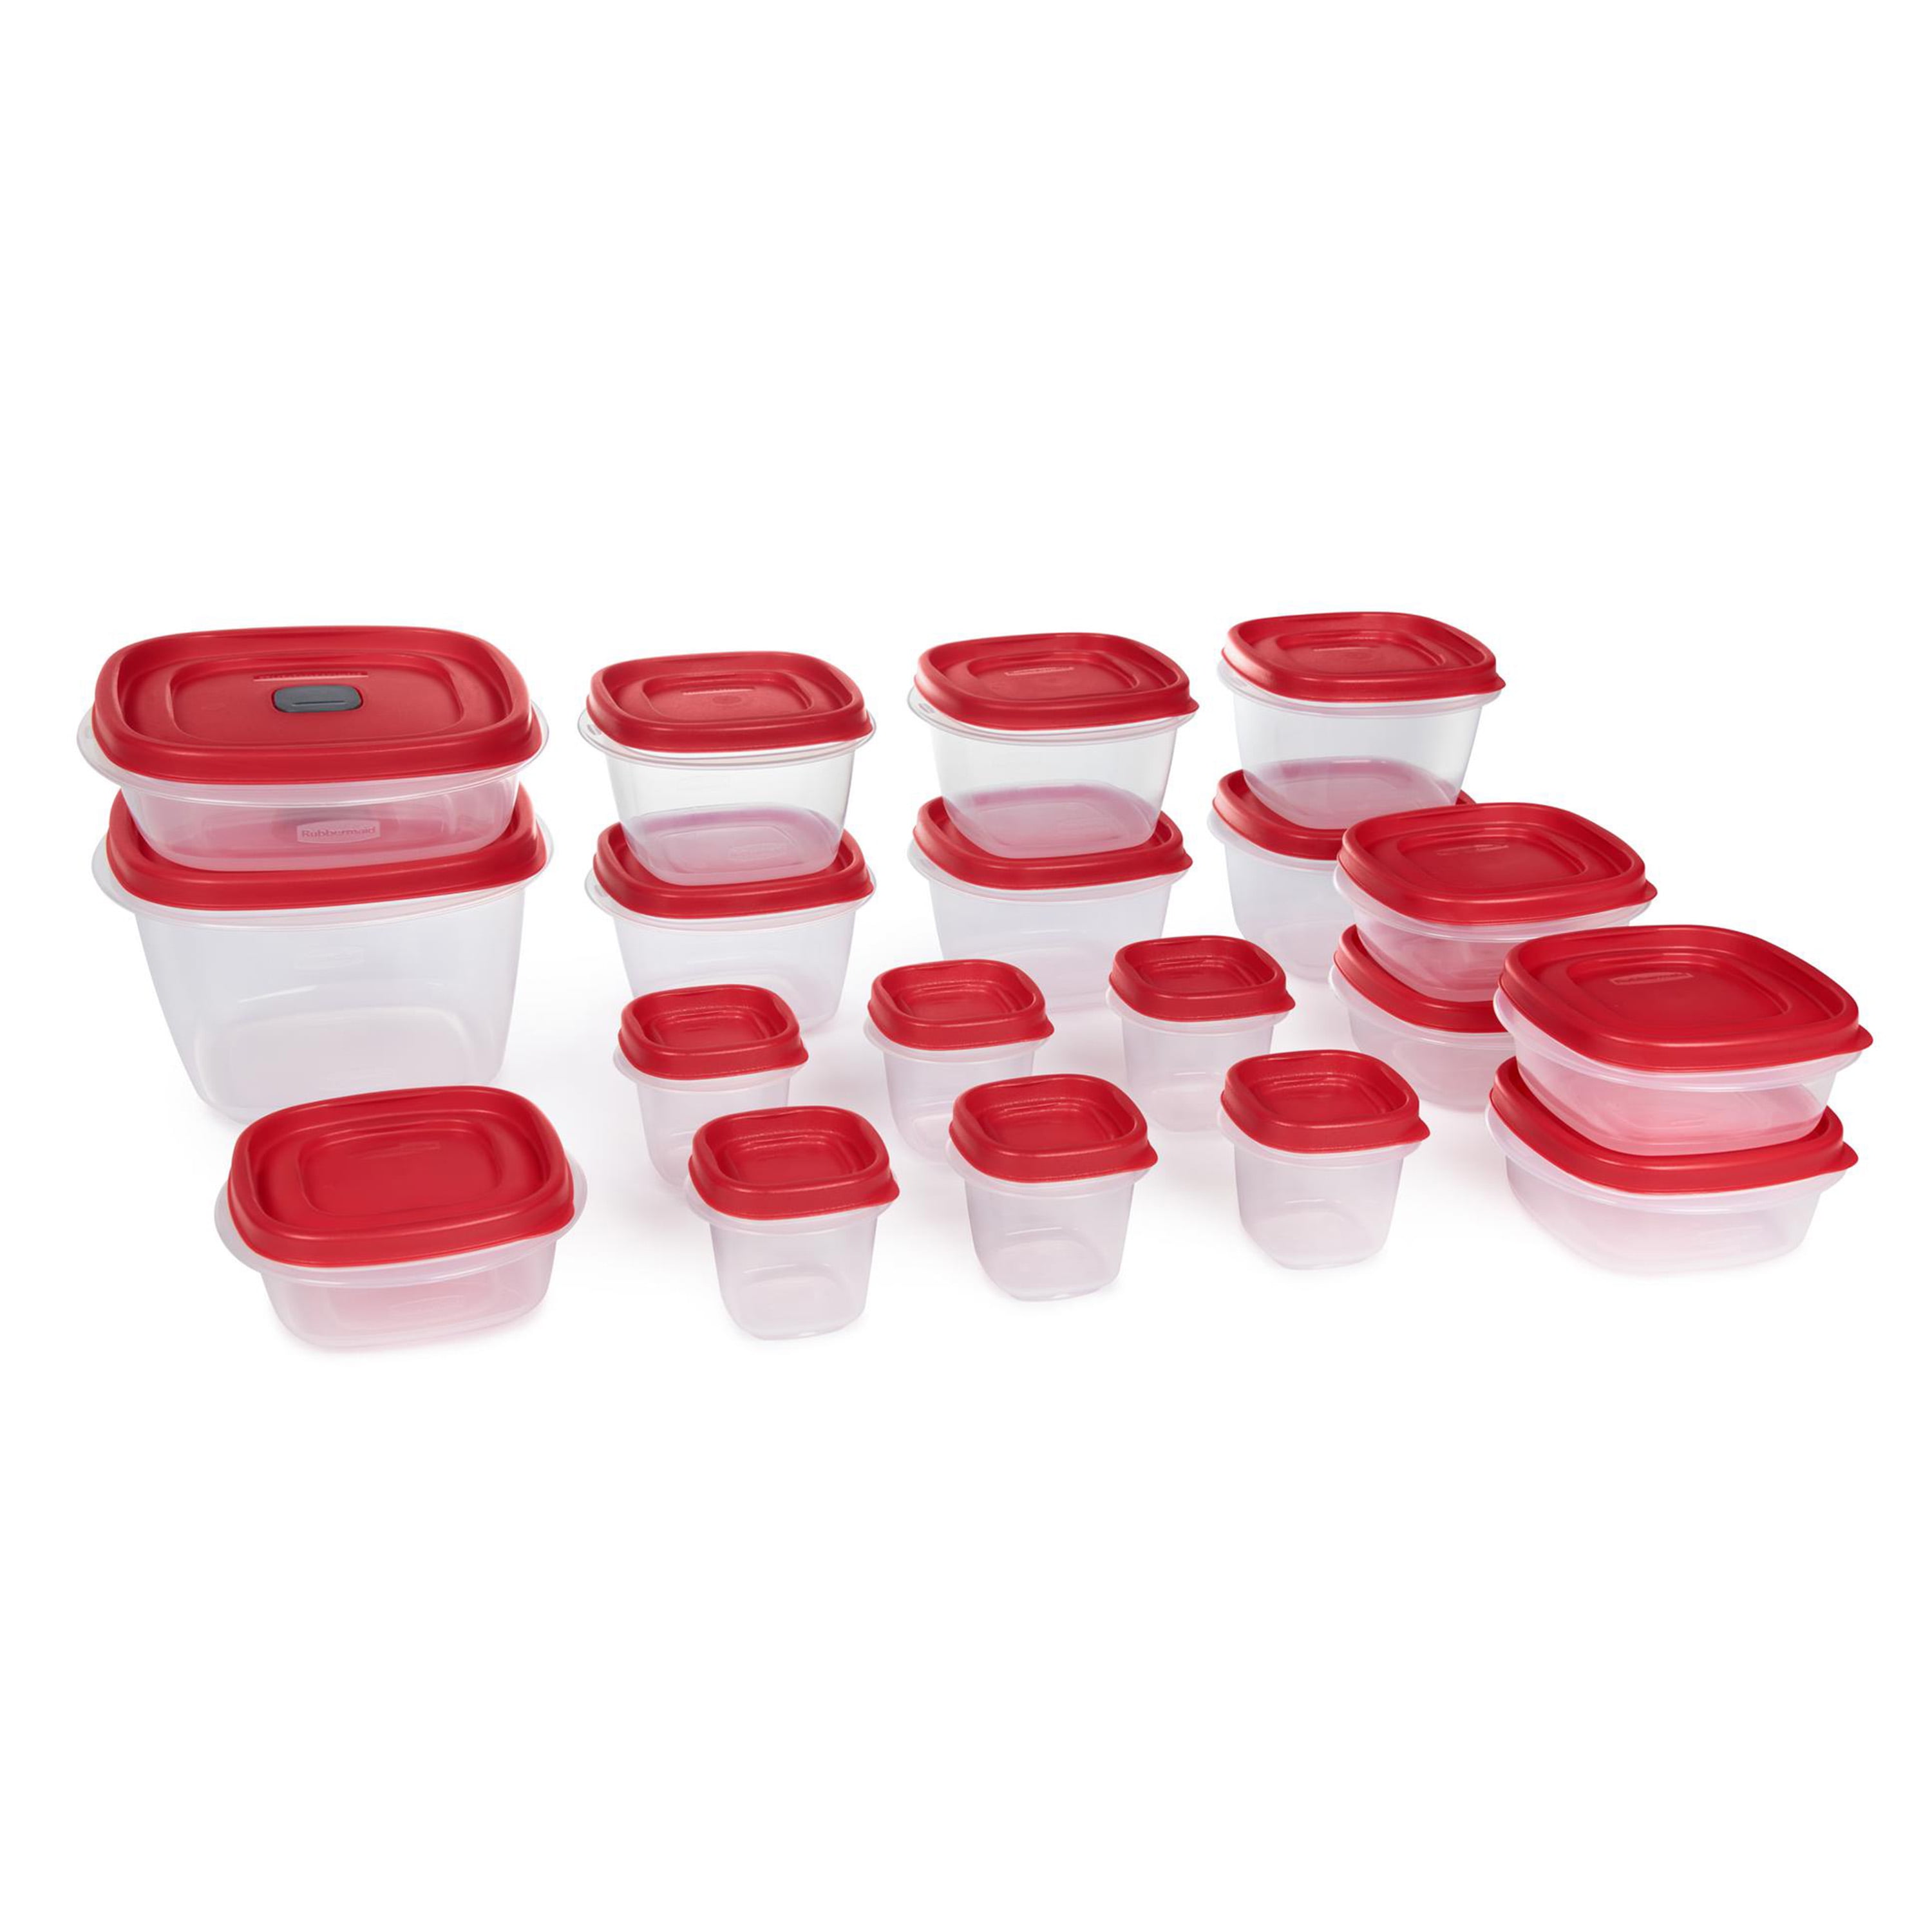 Rubbermaid Easy Find Vented Lids Food Storage Containers 38-Piece Set Red NEW 